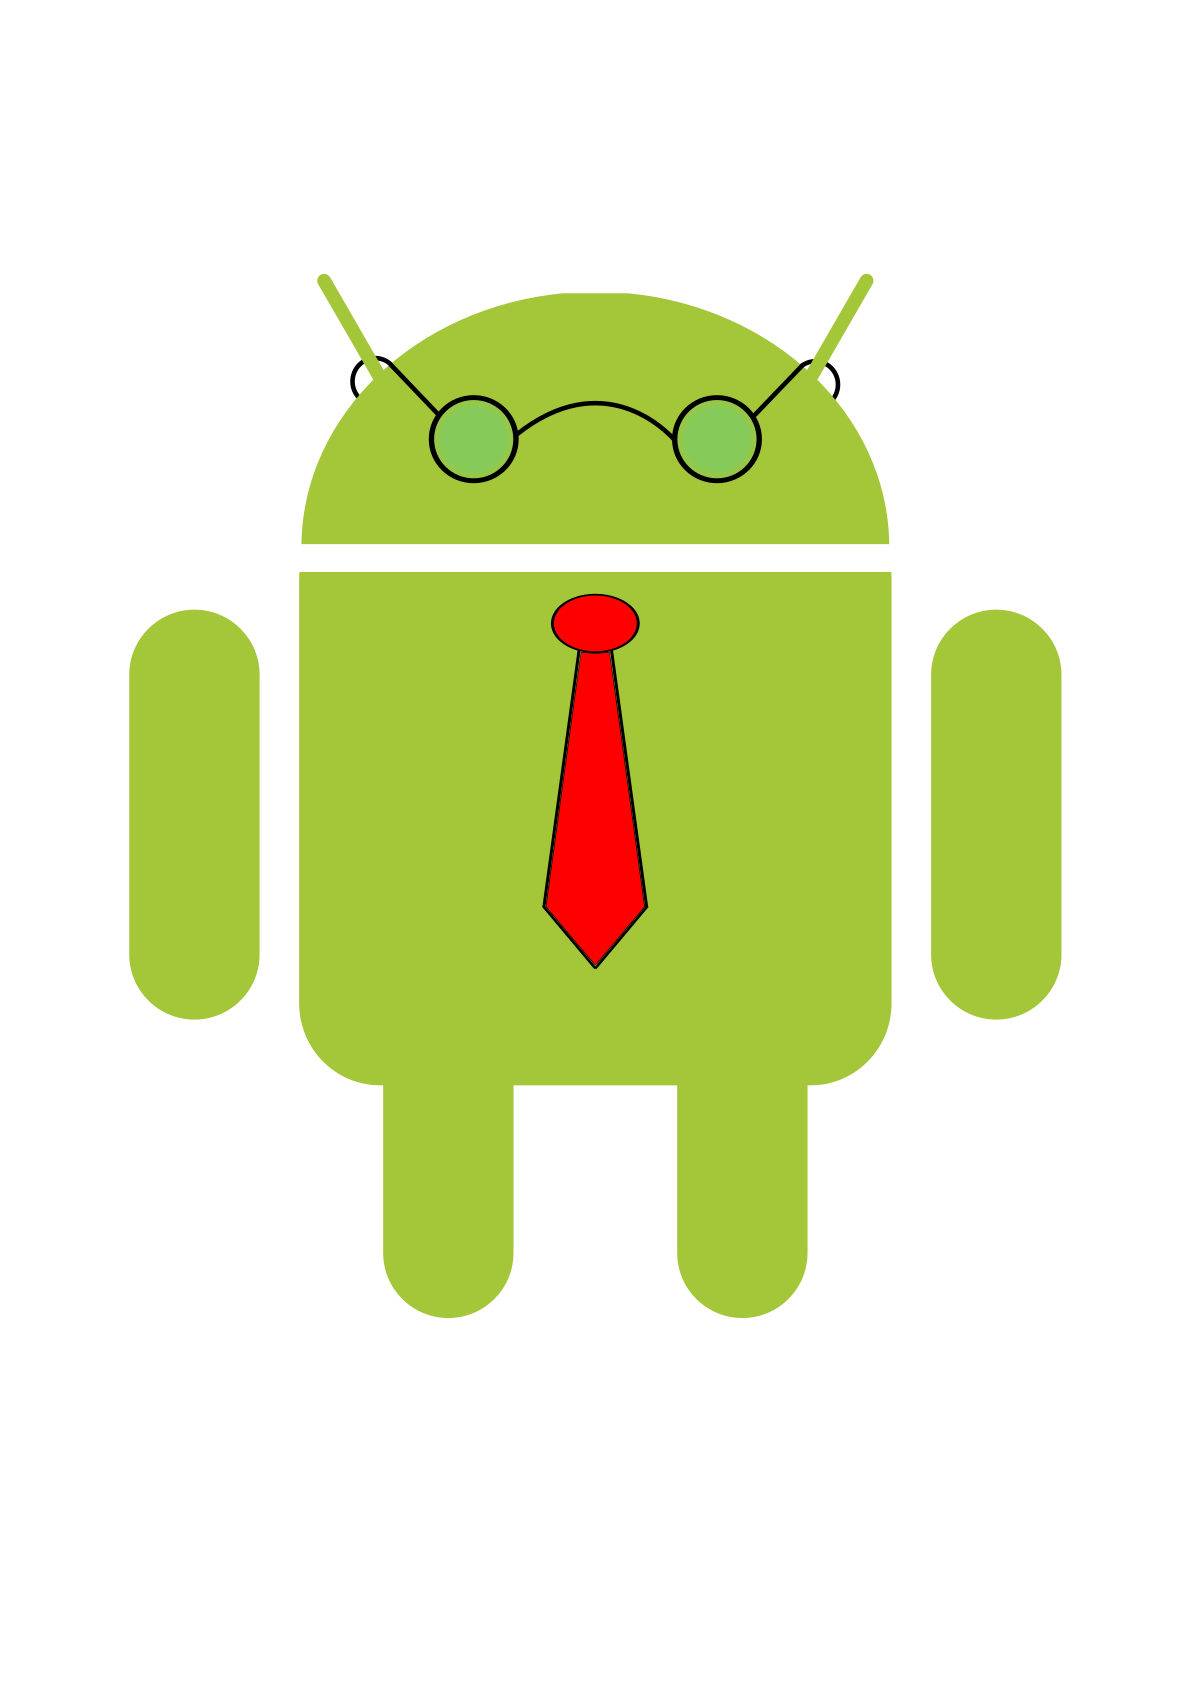 Download File:Android teacher.svg - Wikimedia Commons